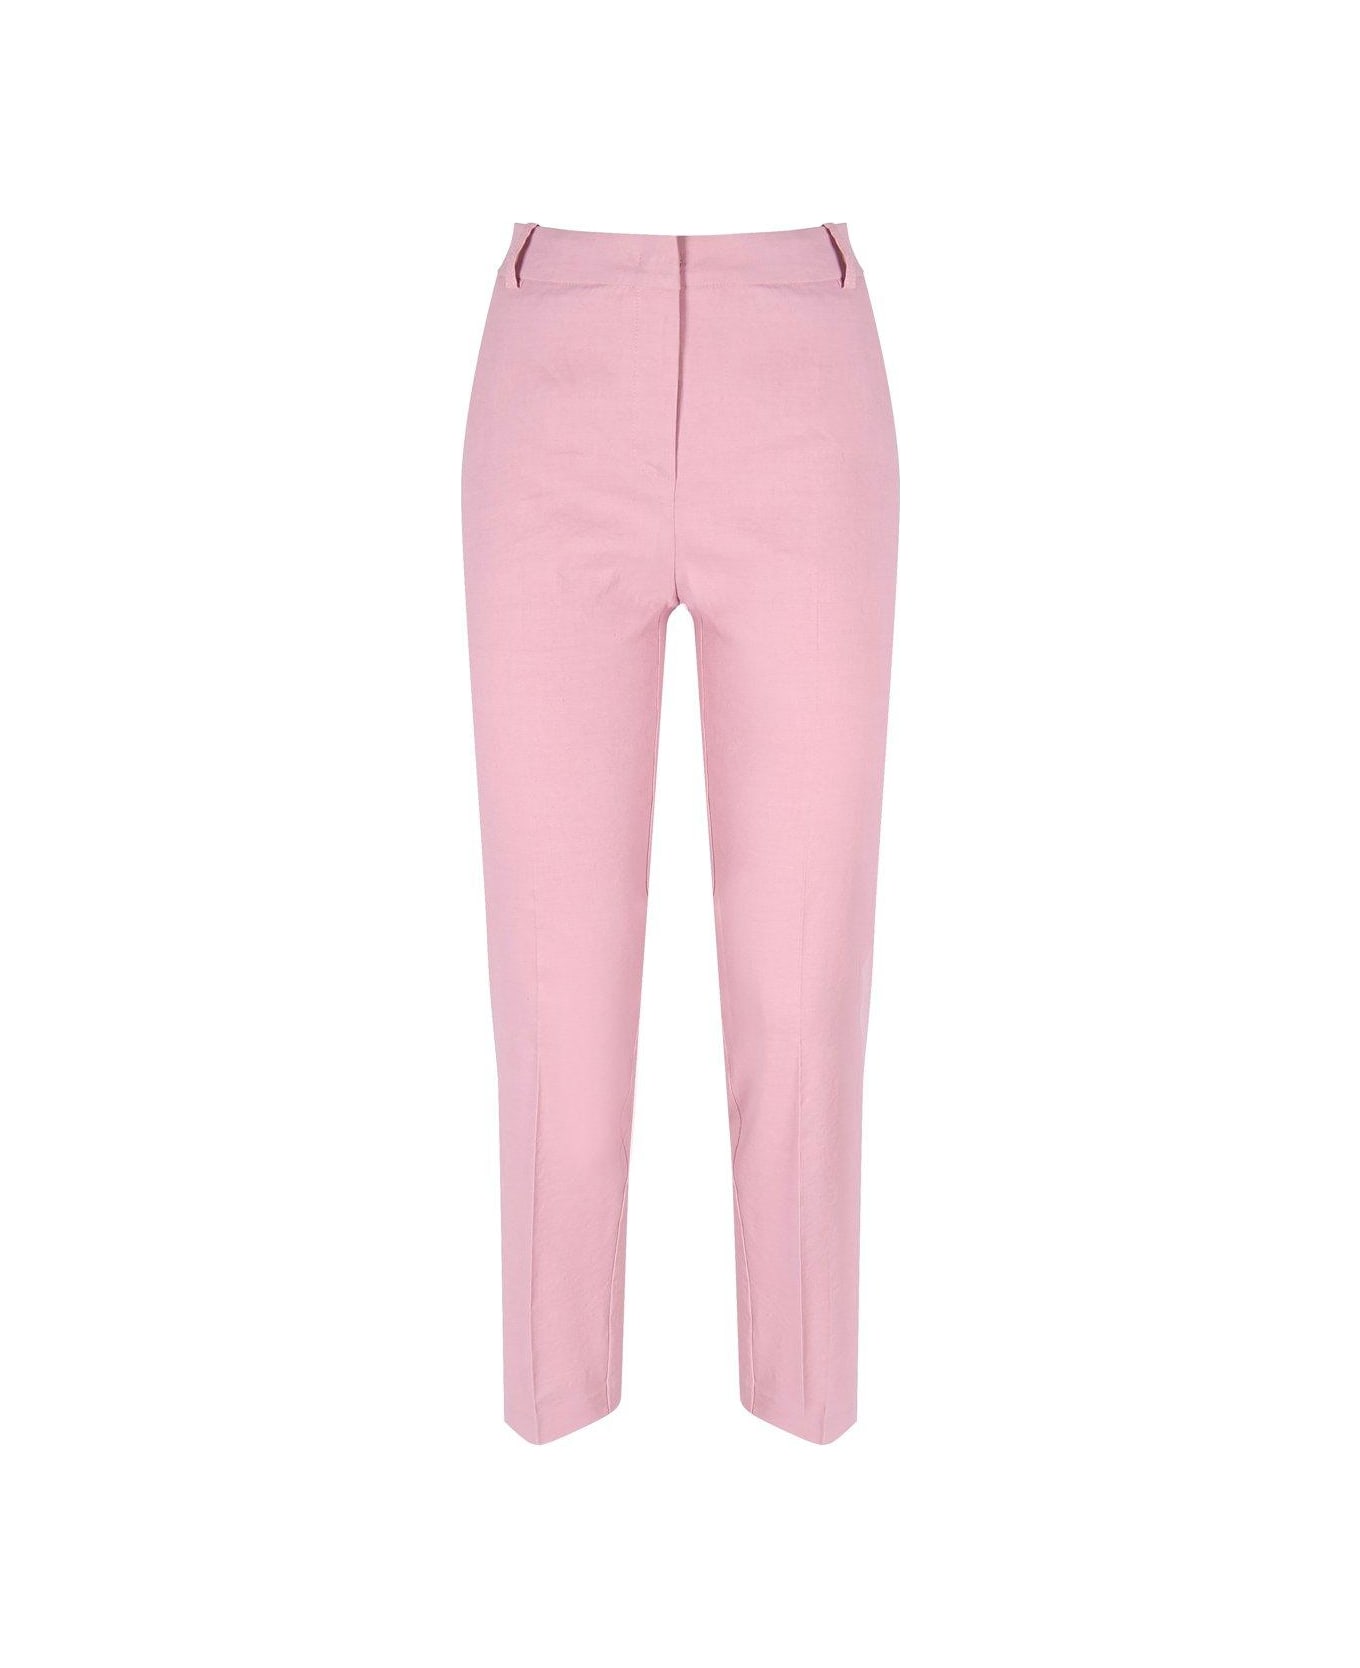 Pinko Mid-rise Skinny Trousers - Pink ボトムス